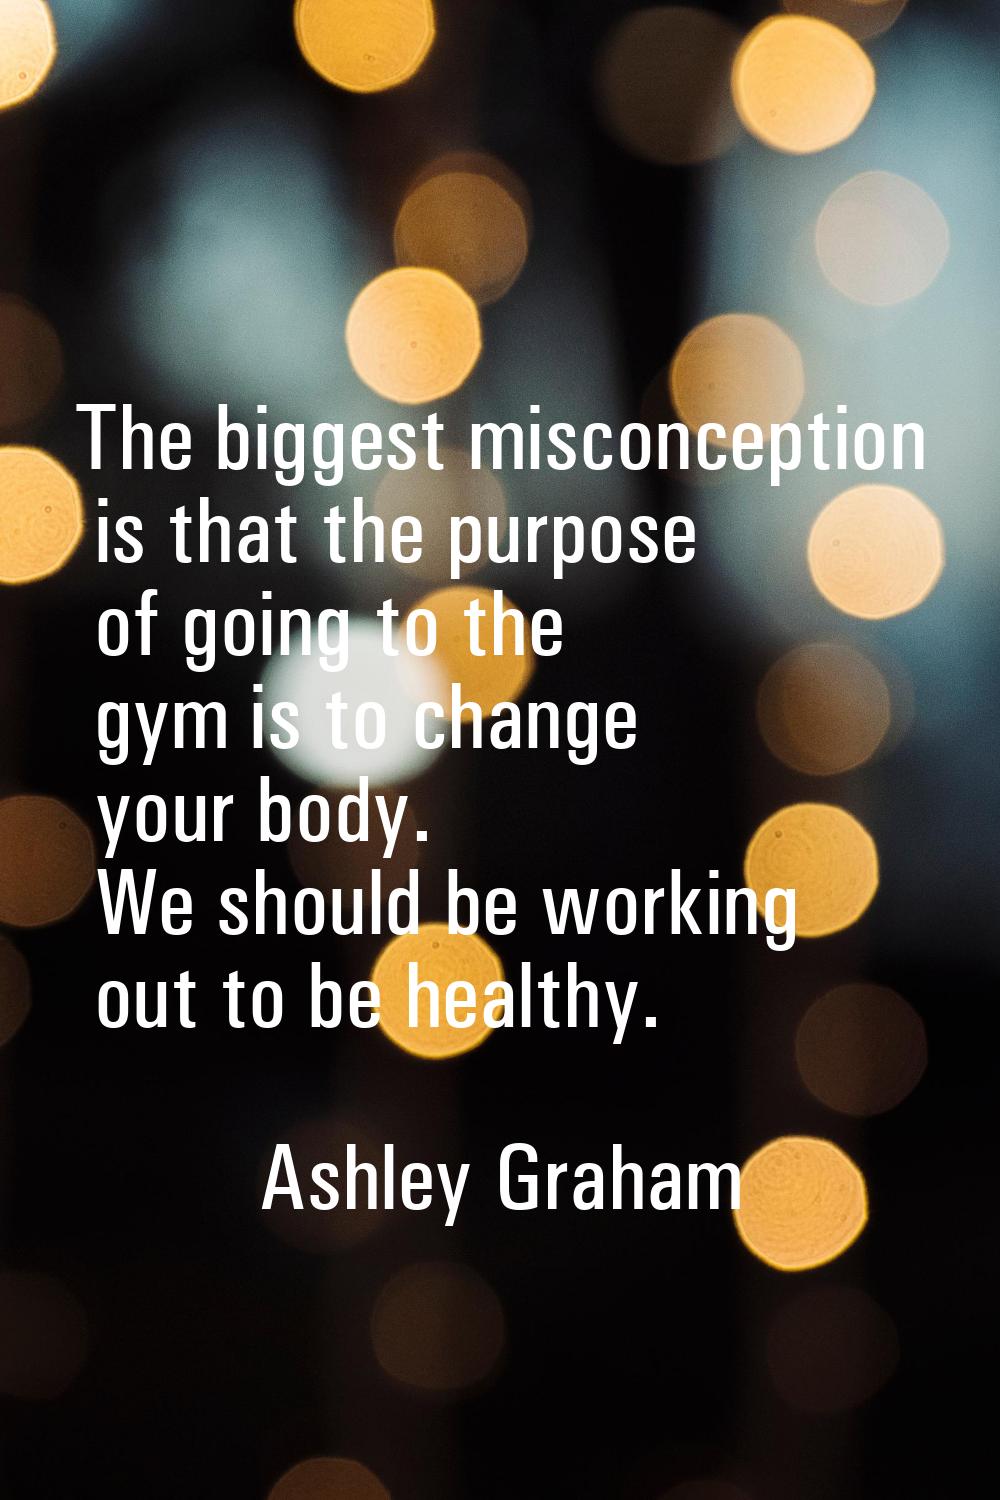 The biggest misconception is that the purpose of going to the gym is to change your body. We should